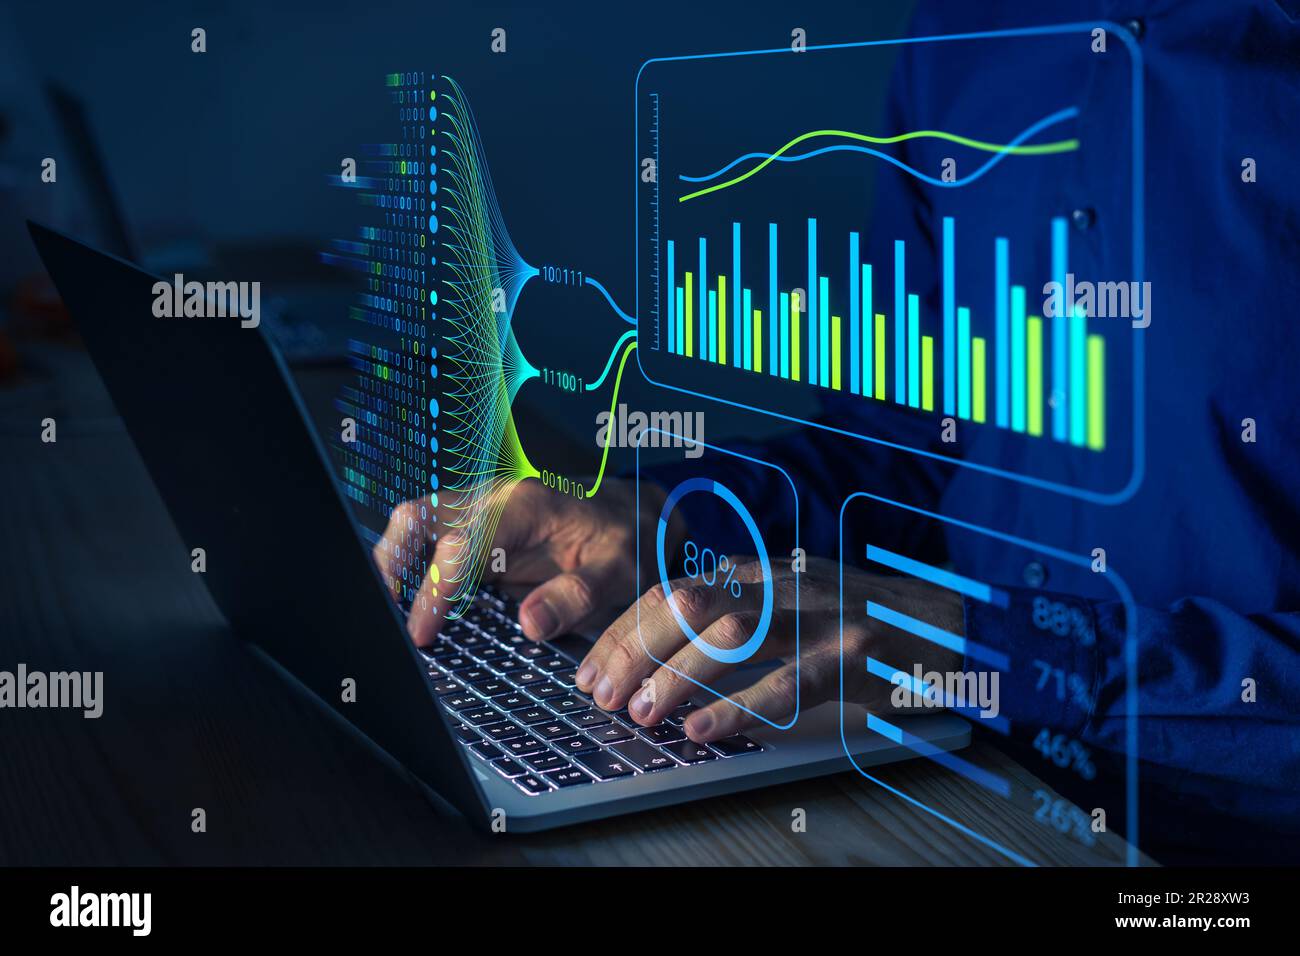 Data analytics and insights powered by big data and artificial intelligence technologies. Data scientist working with complex information analysed by Stock Photo